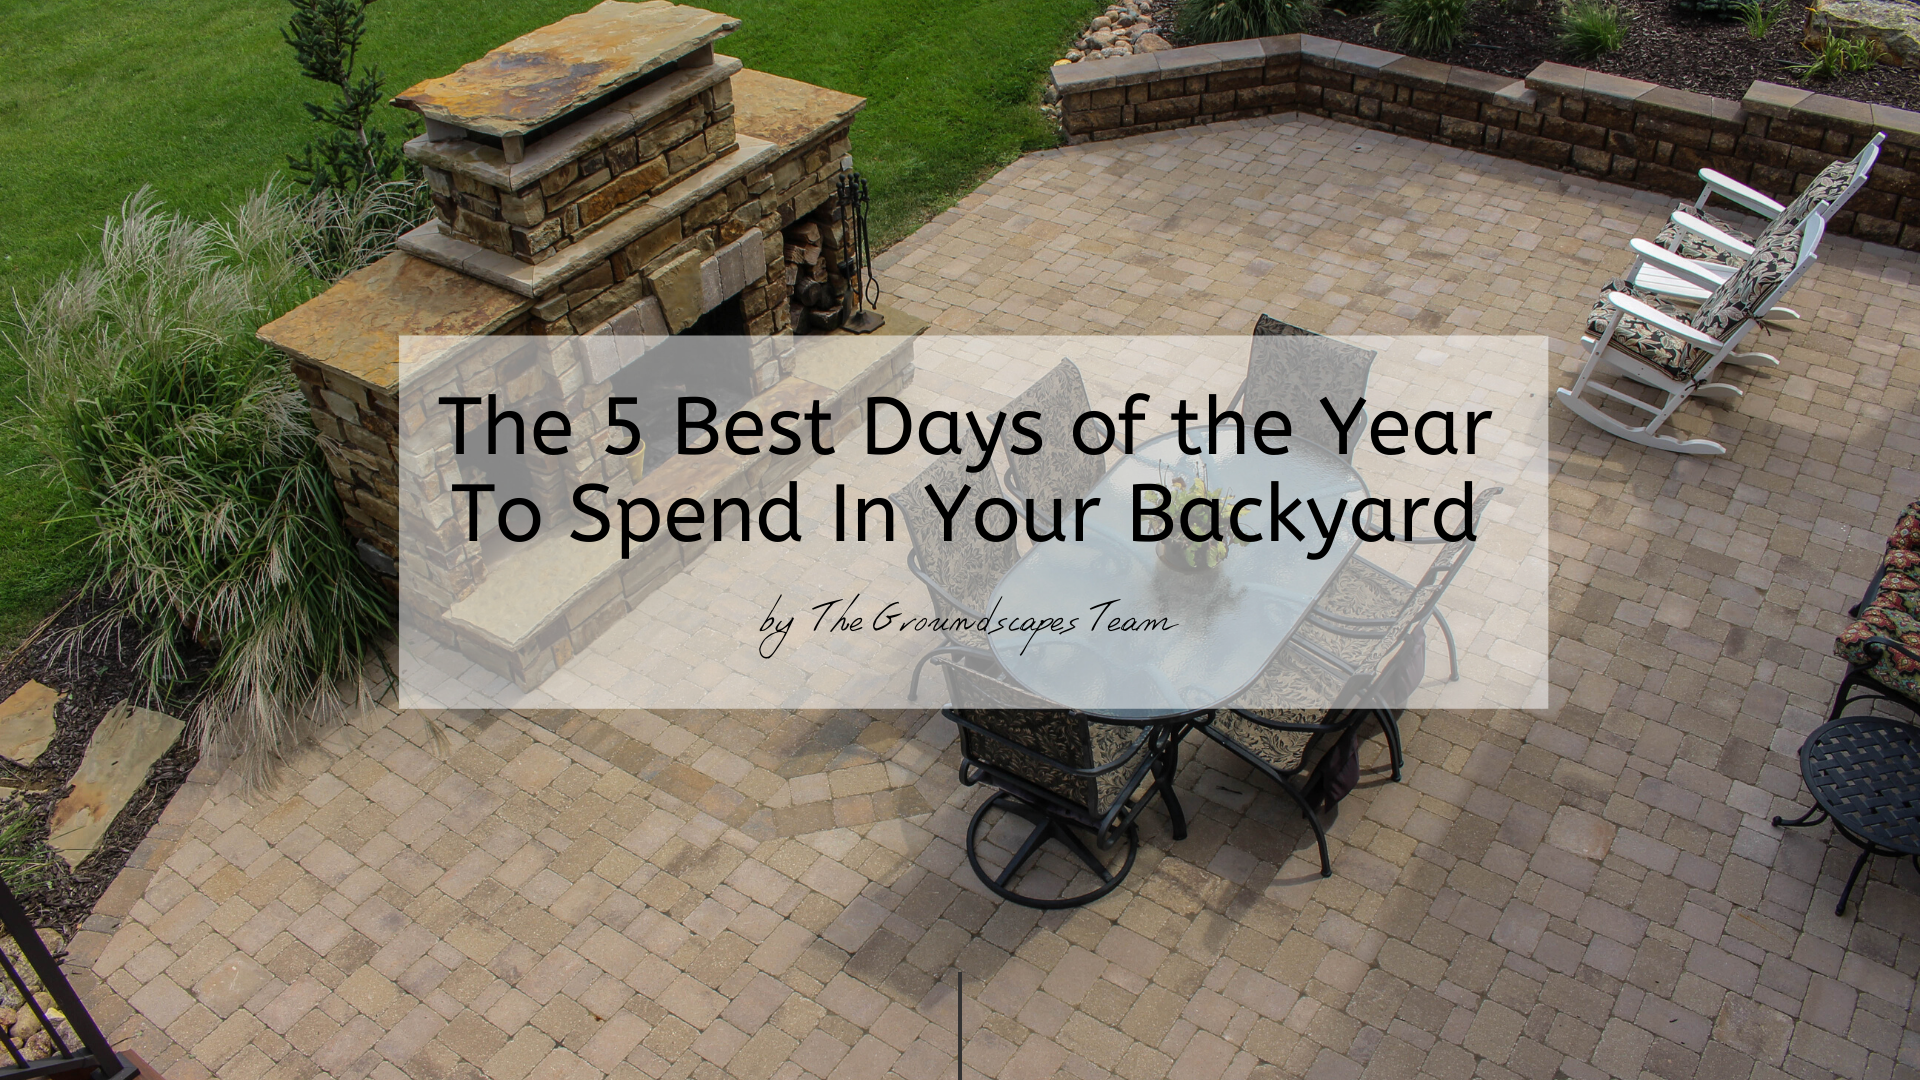 The 5 Best Days of the Year To Spend In Your Backyard